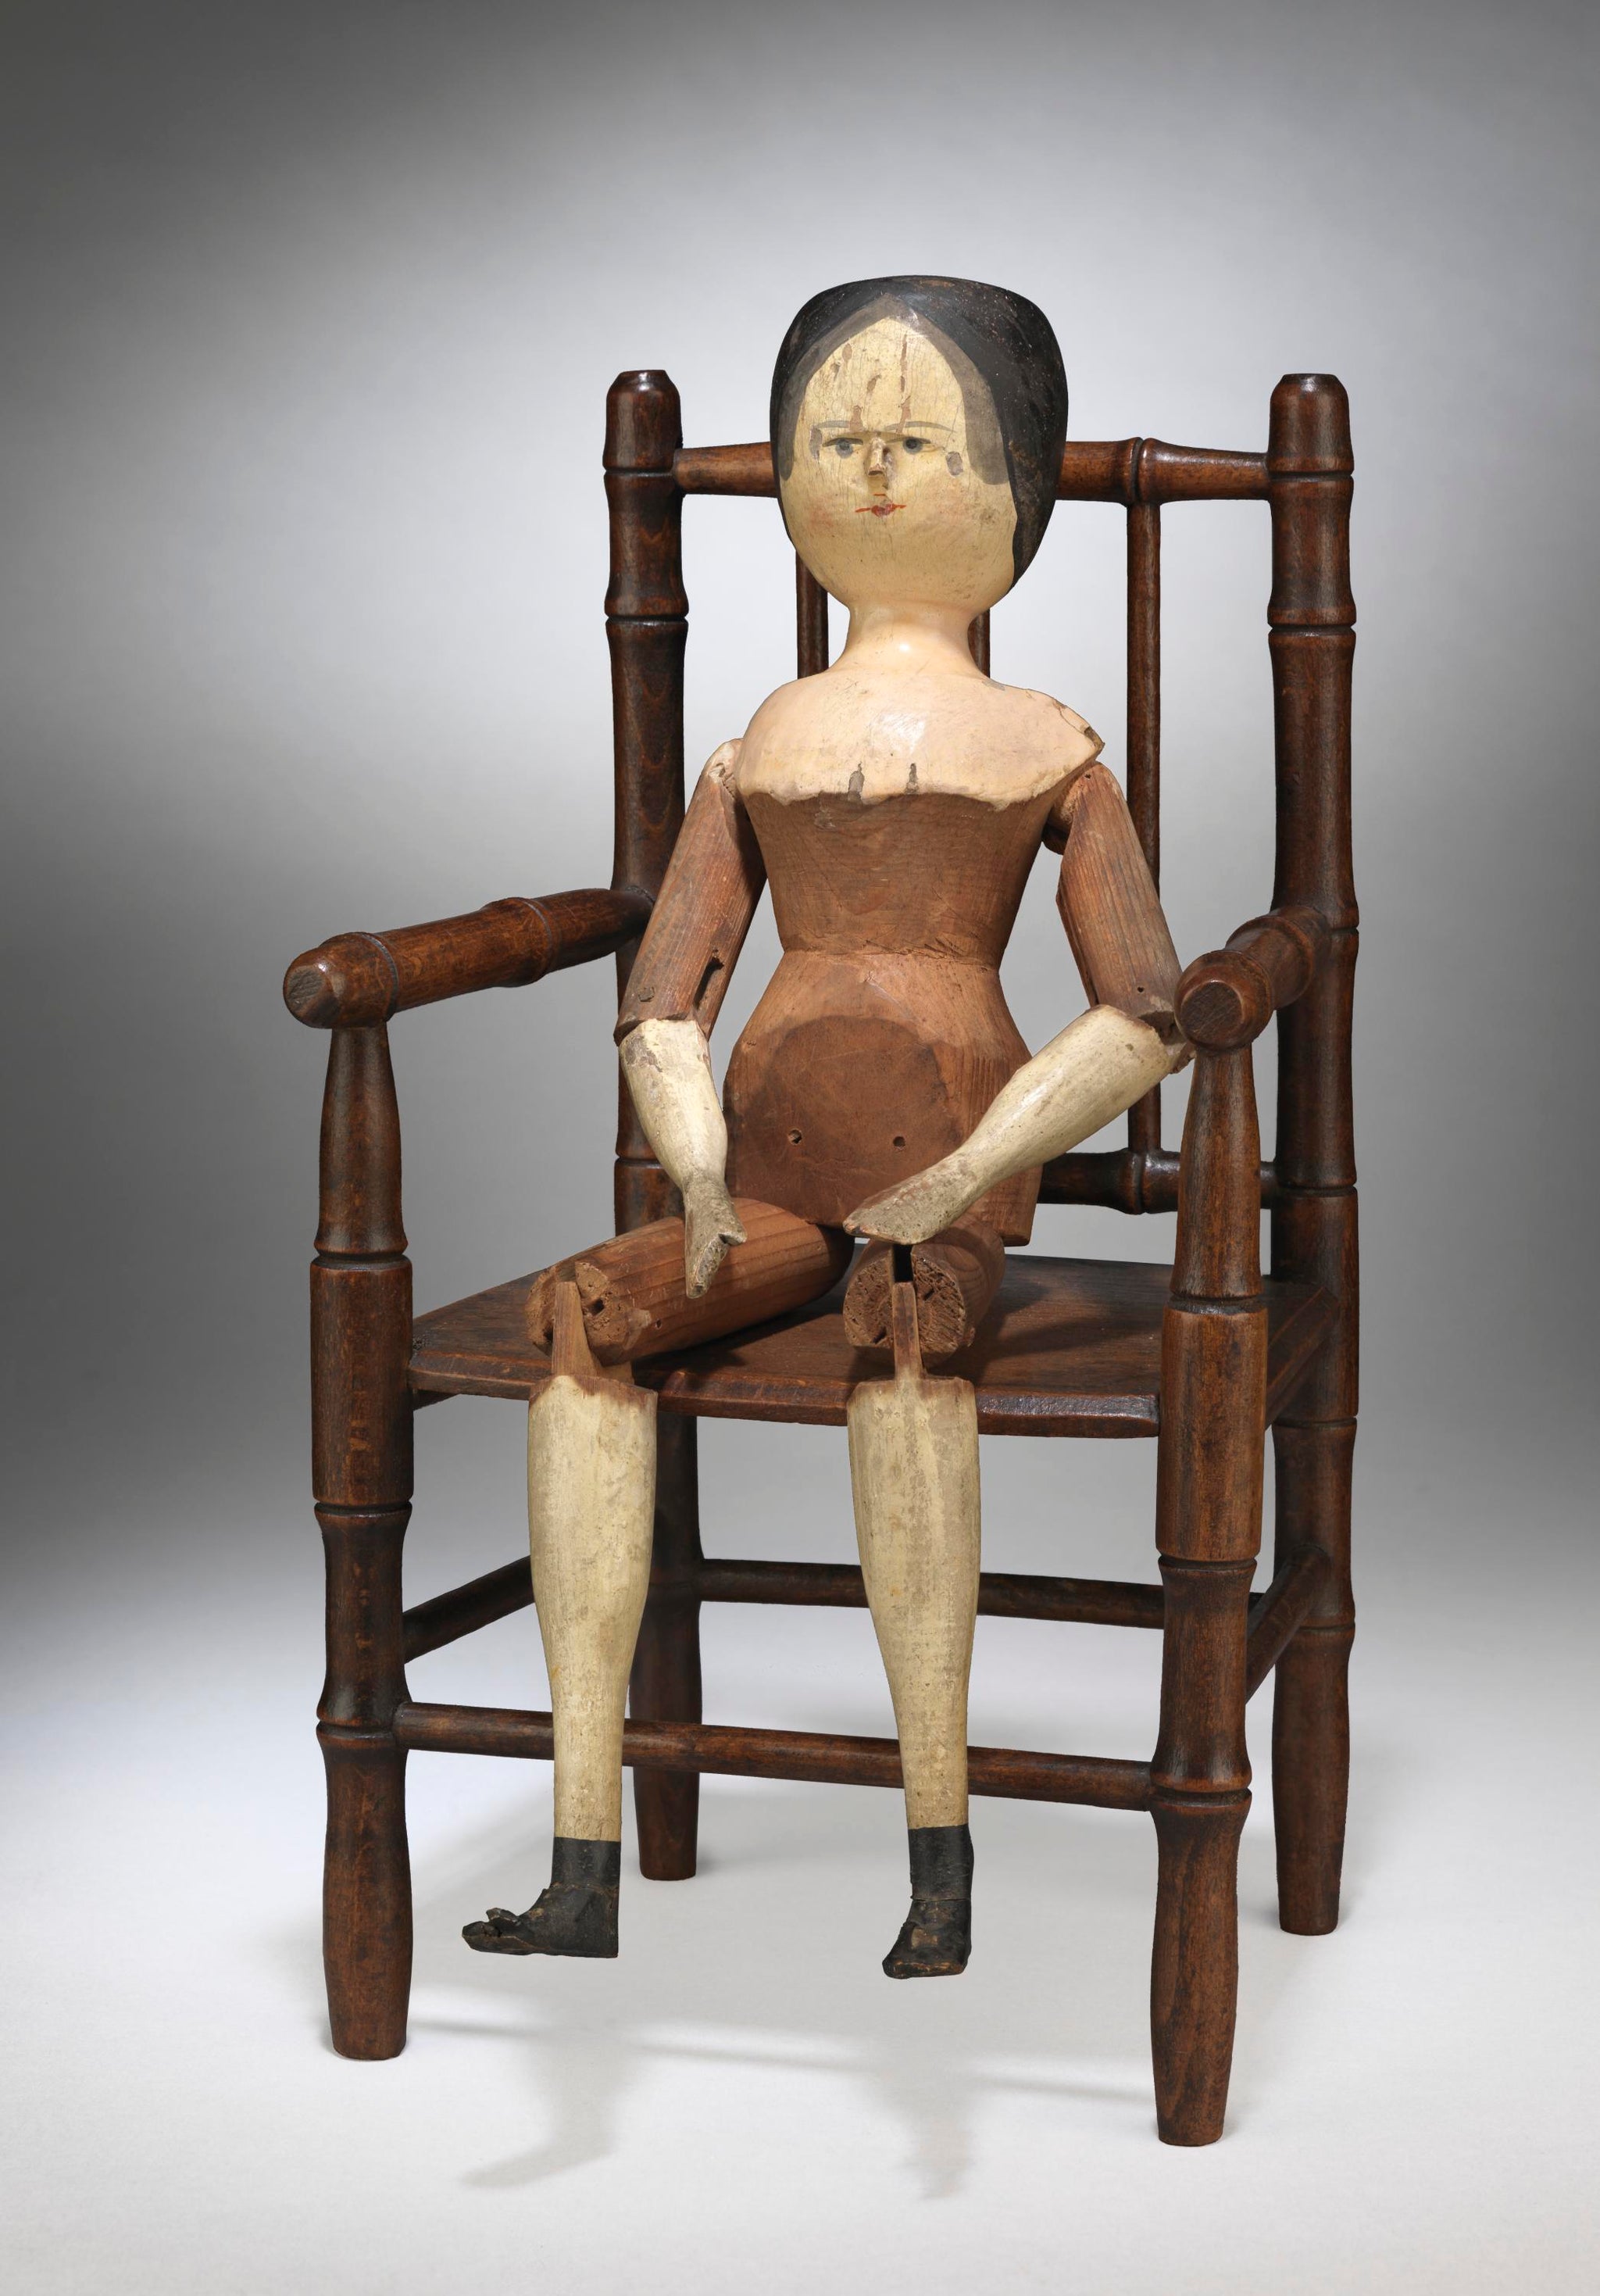 Traditional Primitive Peg Doll Seated in a Miniature Simulated Bamboo Armchair